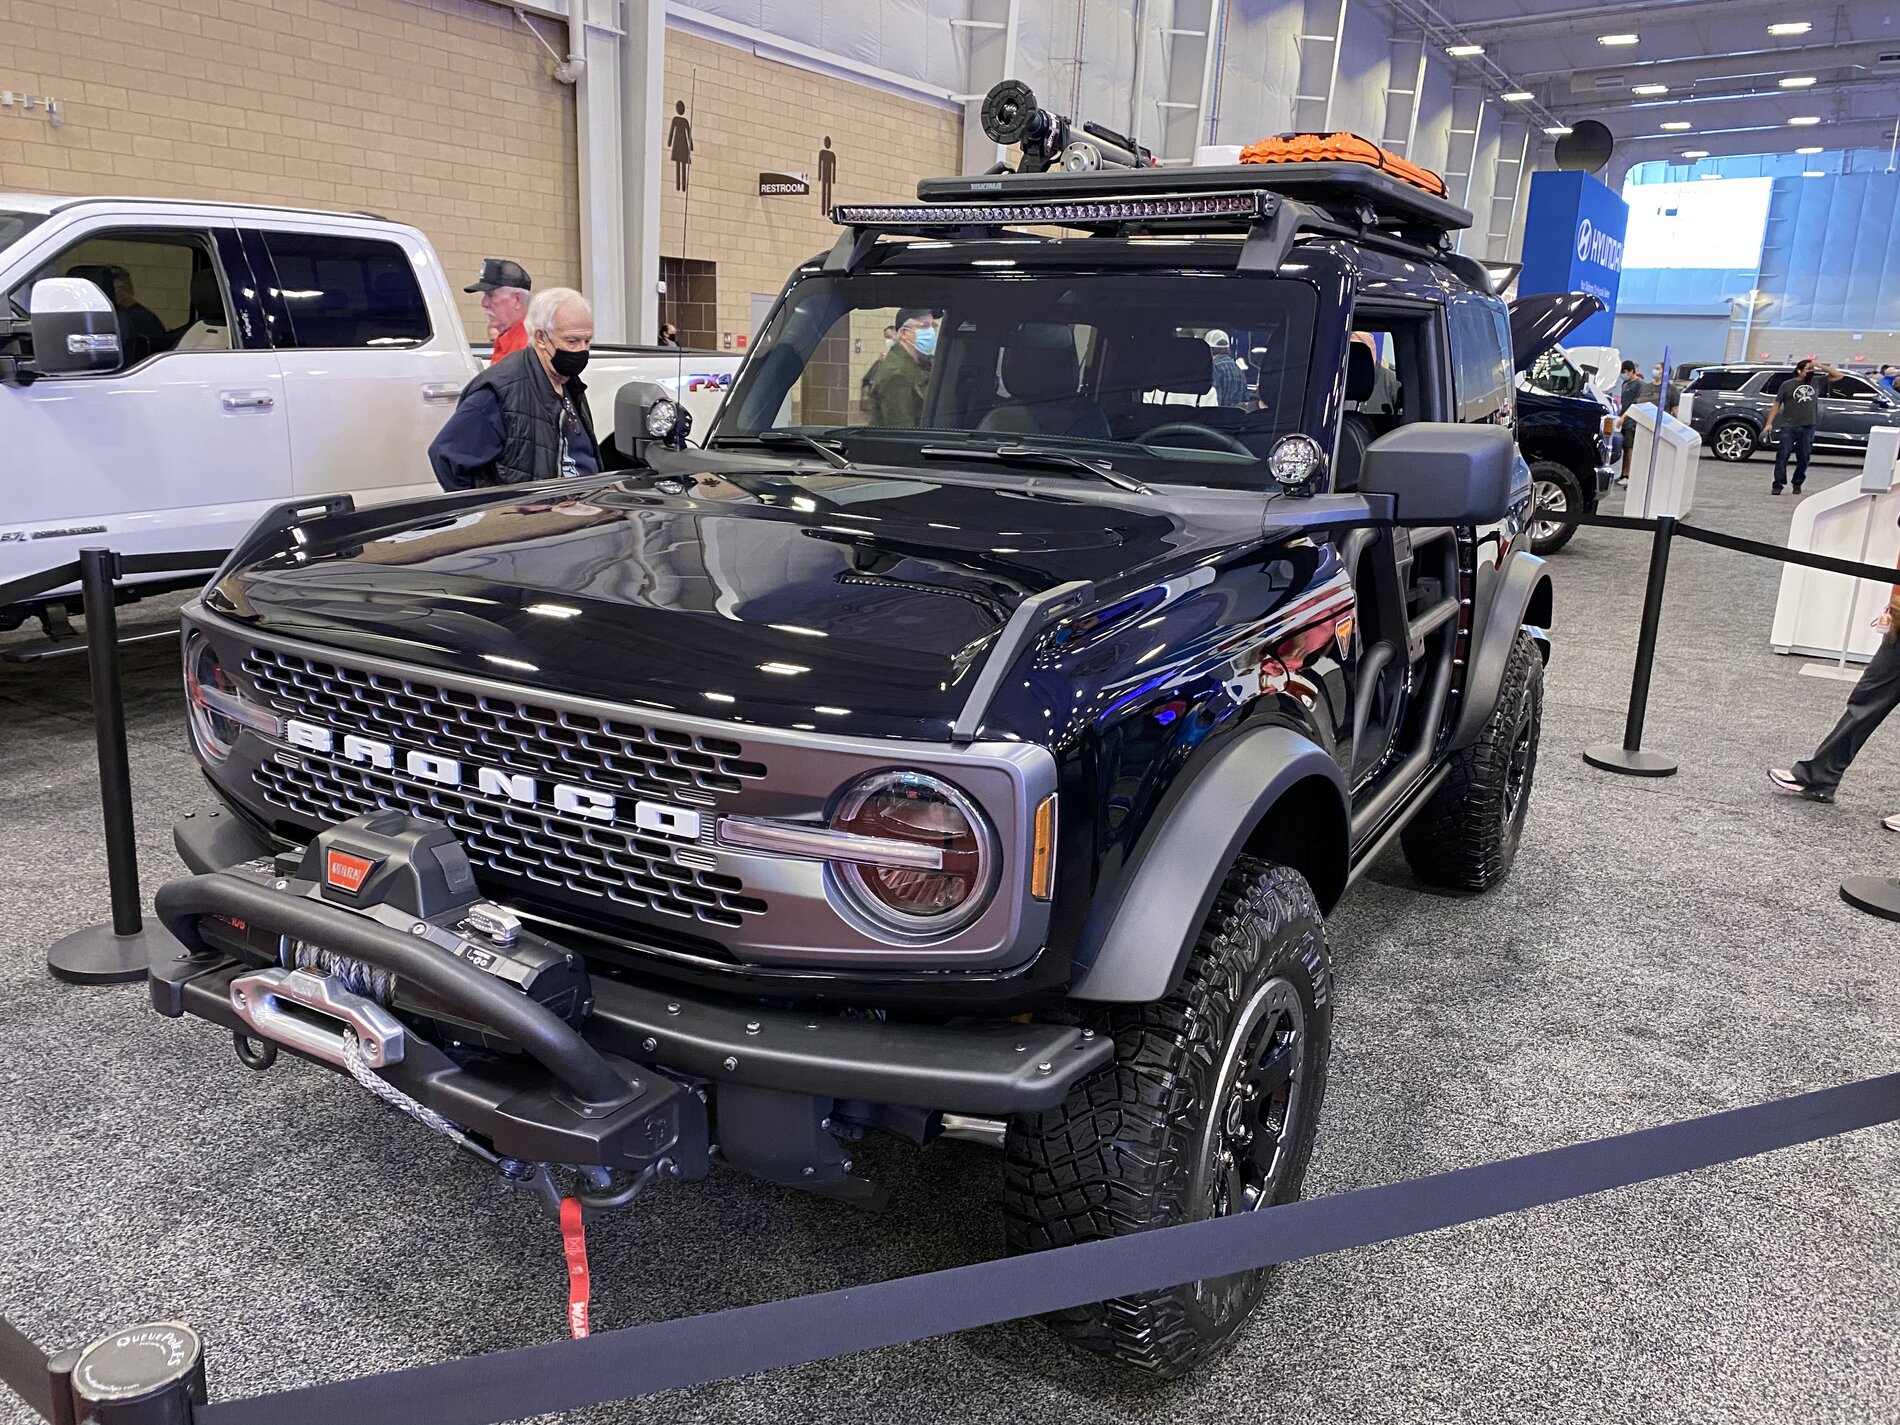 Ford Bronco Pics & Videos From OKC Show: 2-Door Trail Concept and Overland Concept Broncos 20210305_103251